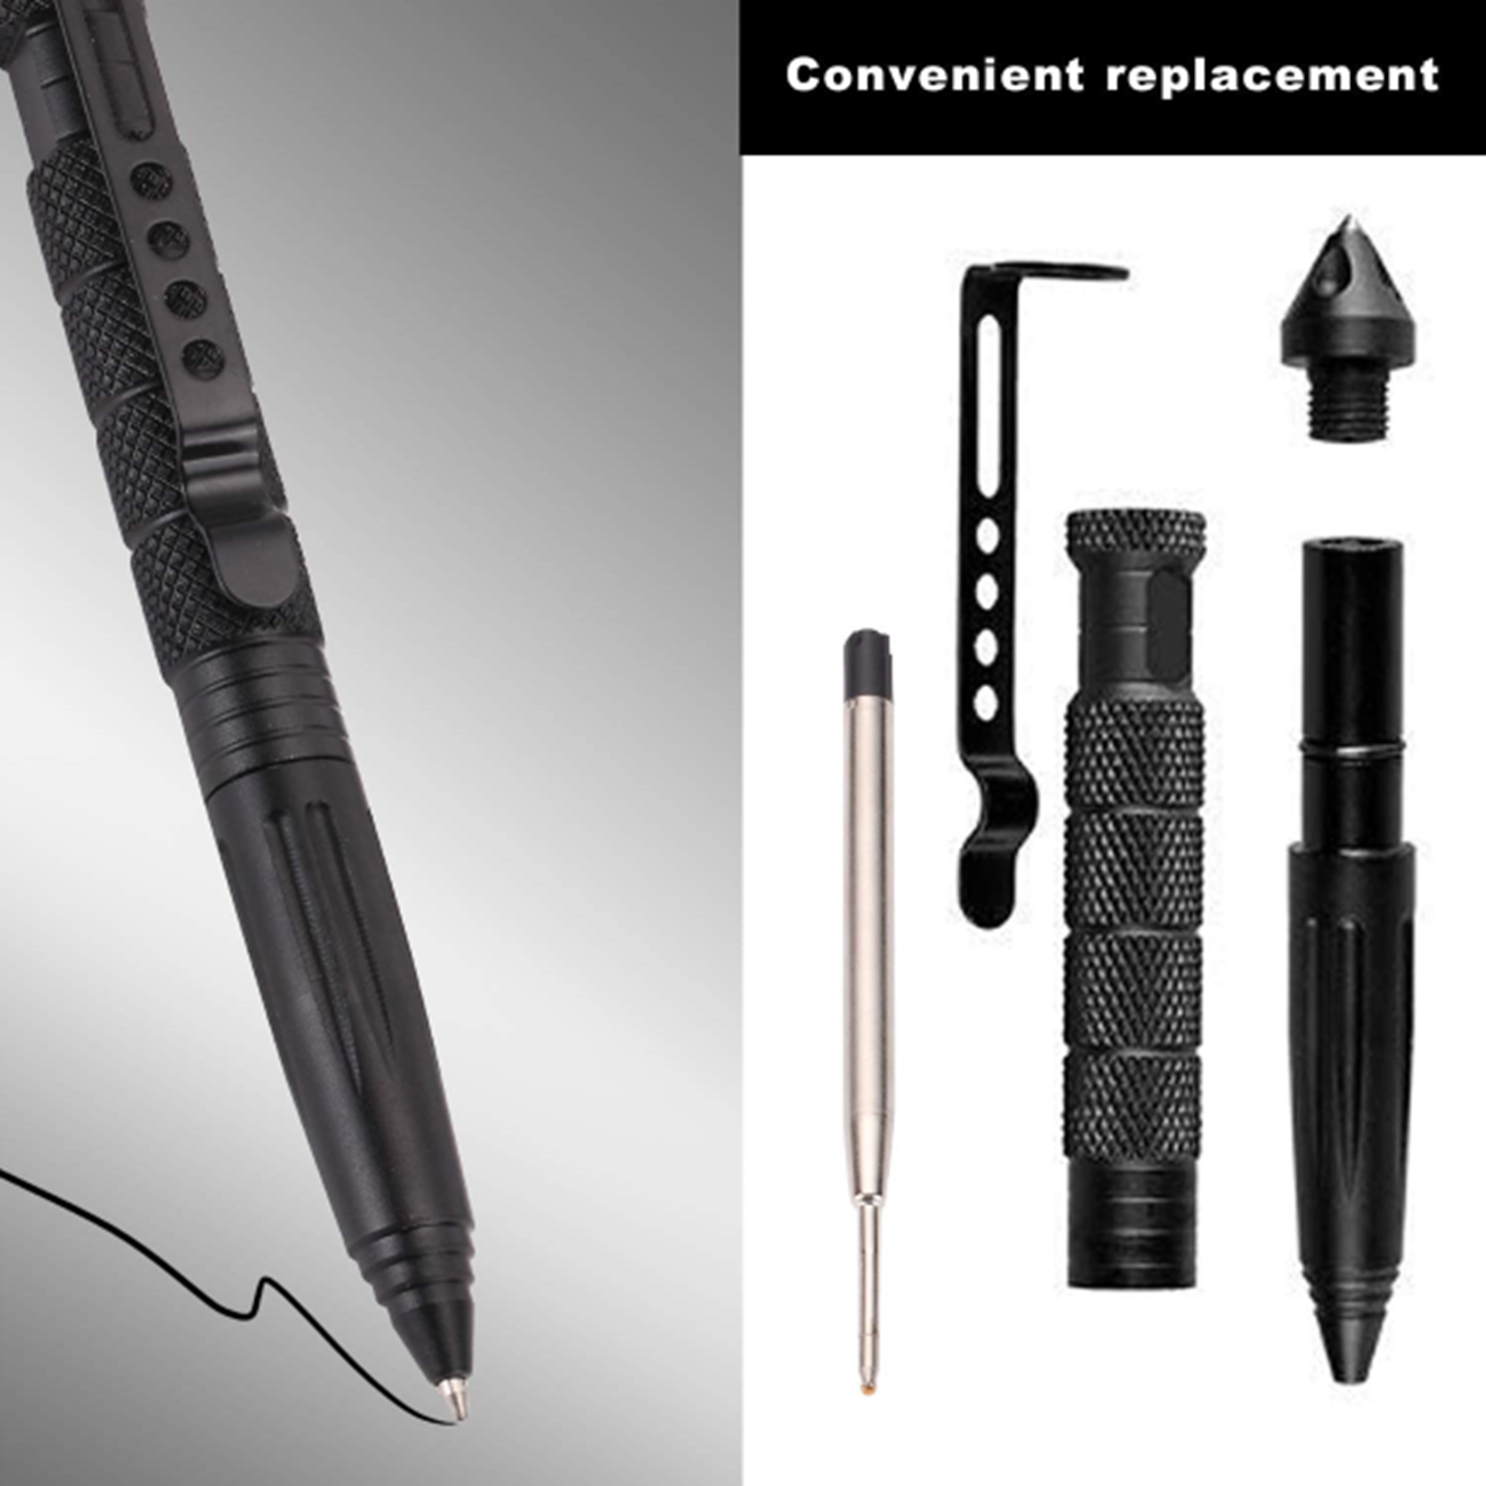 Tactical Pen Emergency Glass Breaker, with 2 Black Ballpoint Refills for Writing, Made of Tungsten Steel & Aluminum (Black)